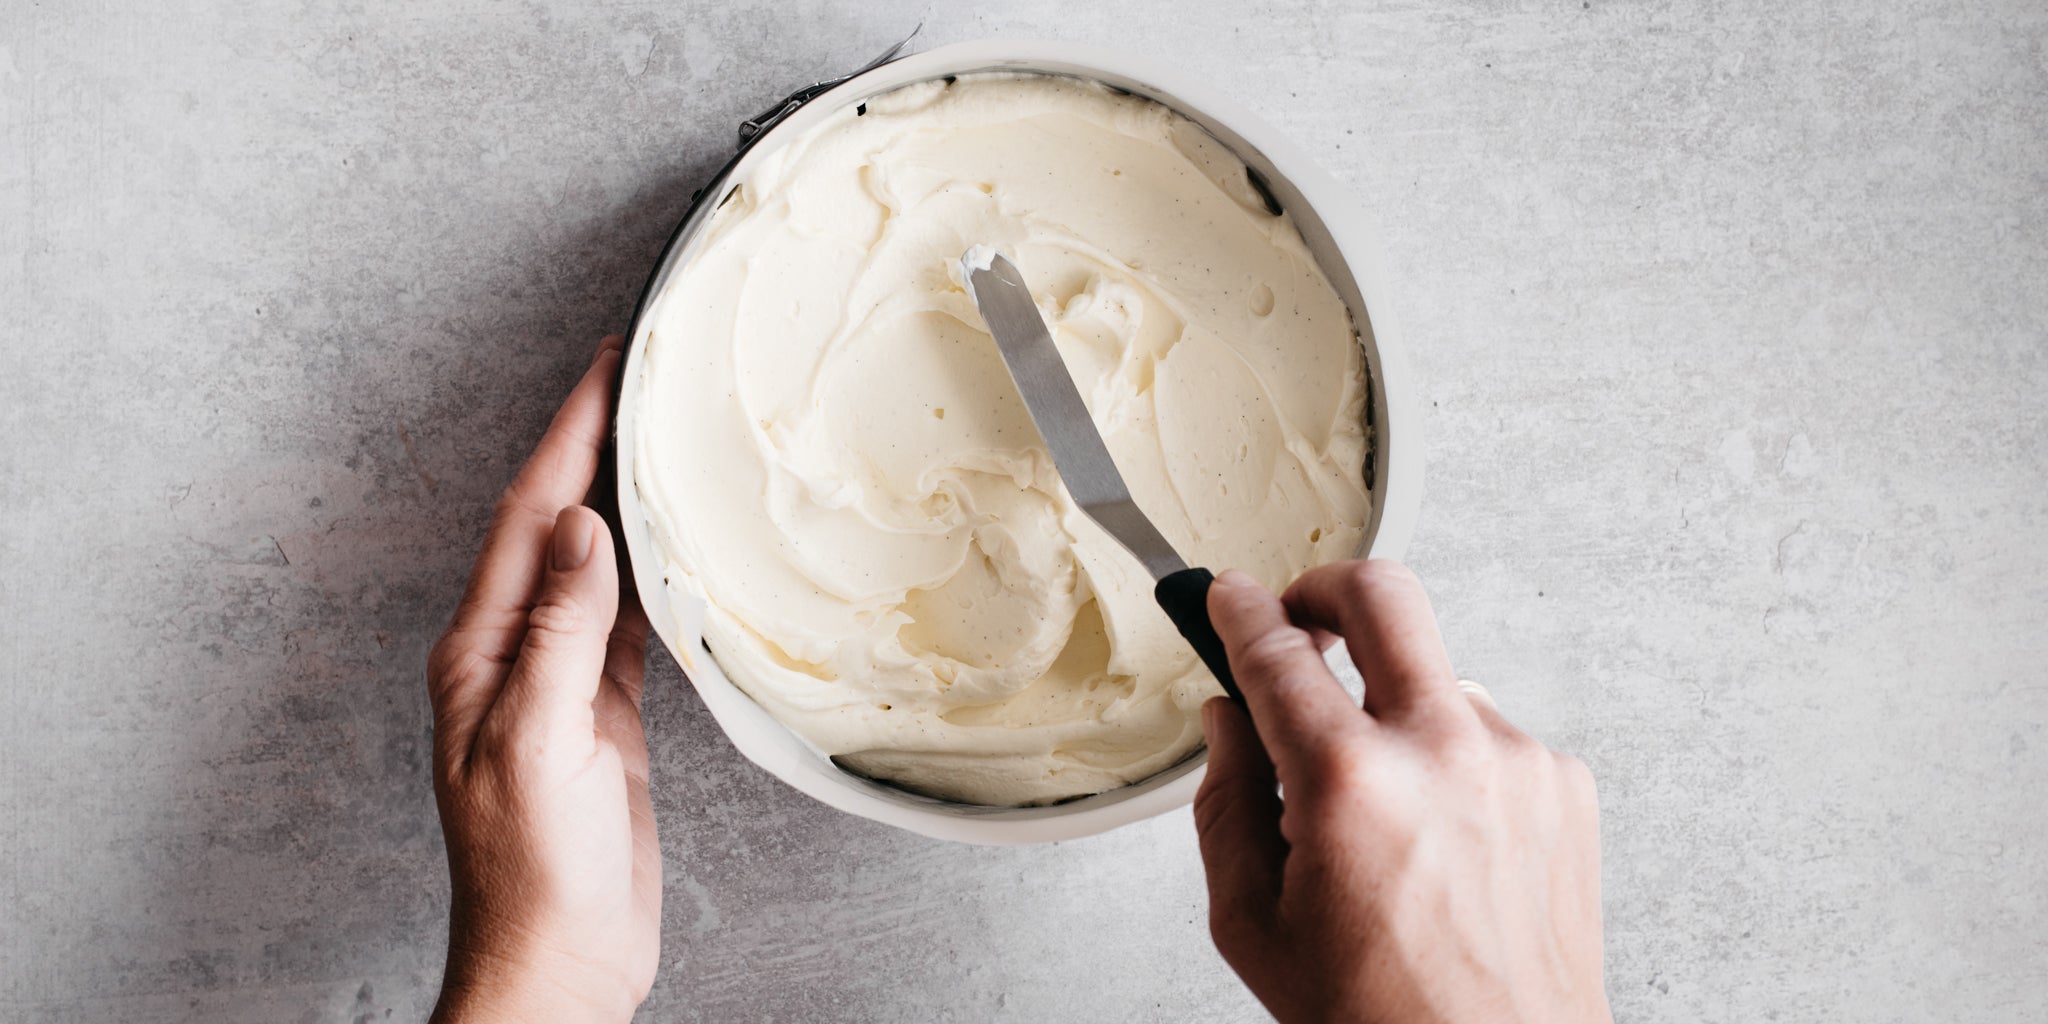 Hand smoothing down cheesecake mixture with a spatula